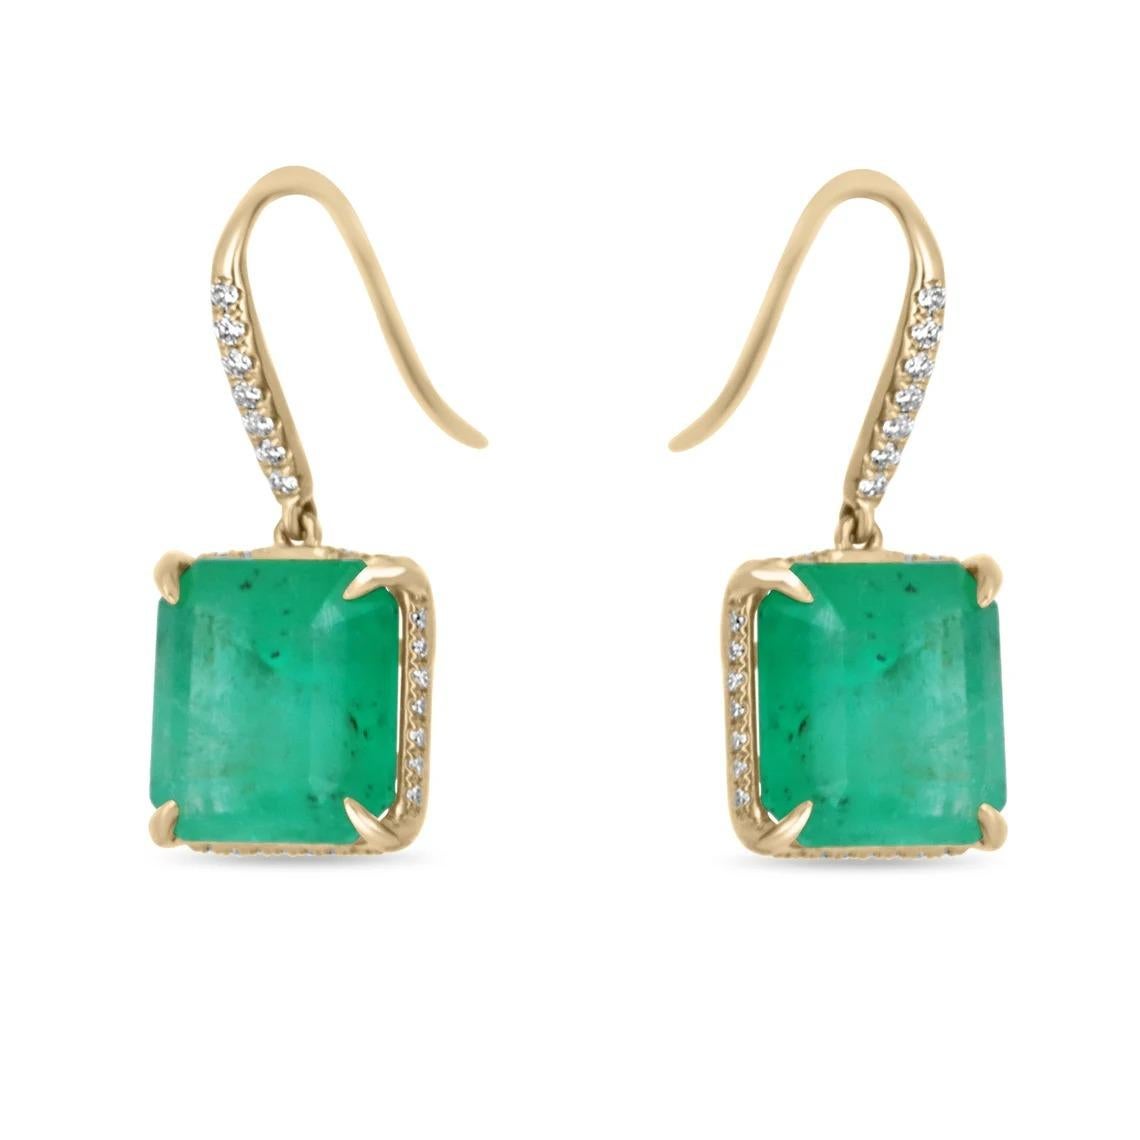 A stylish pair of natural Colombian emerald JUMBO cut-emerald & diamond hook earrings hand made in solid 18K yellow gold. The chic pair of earrings feature dark medium green, genuine ethically mined Colombian emeralds. The rare large emeralds are